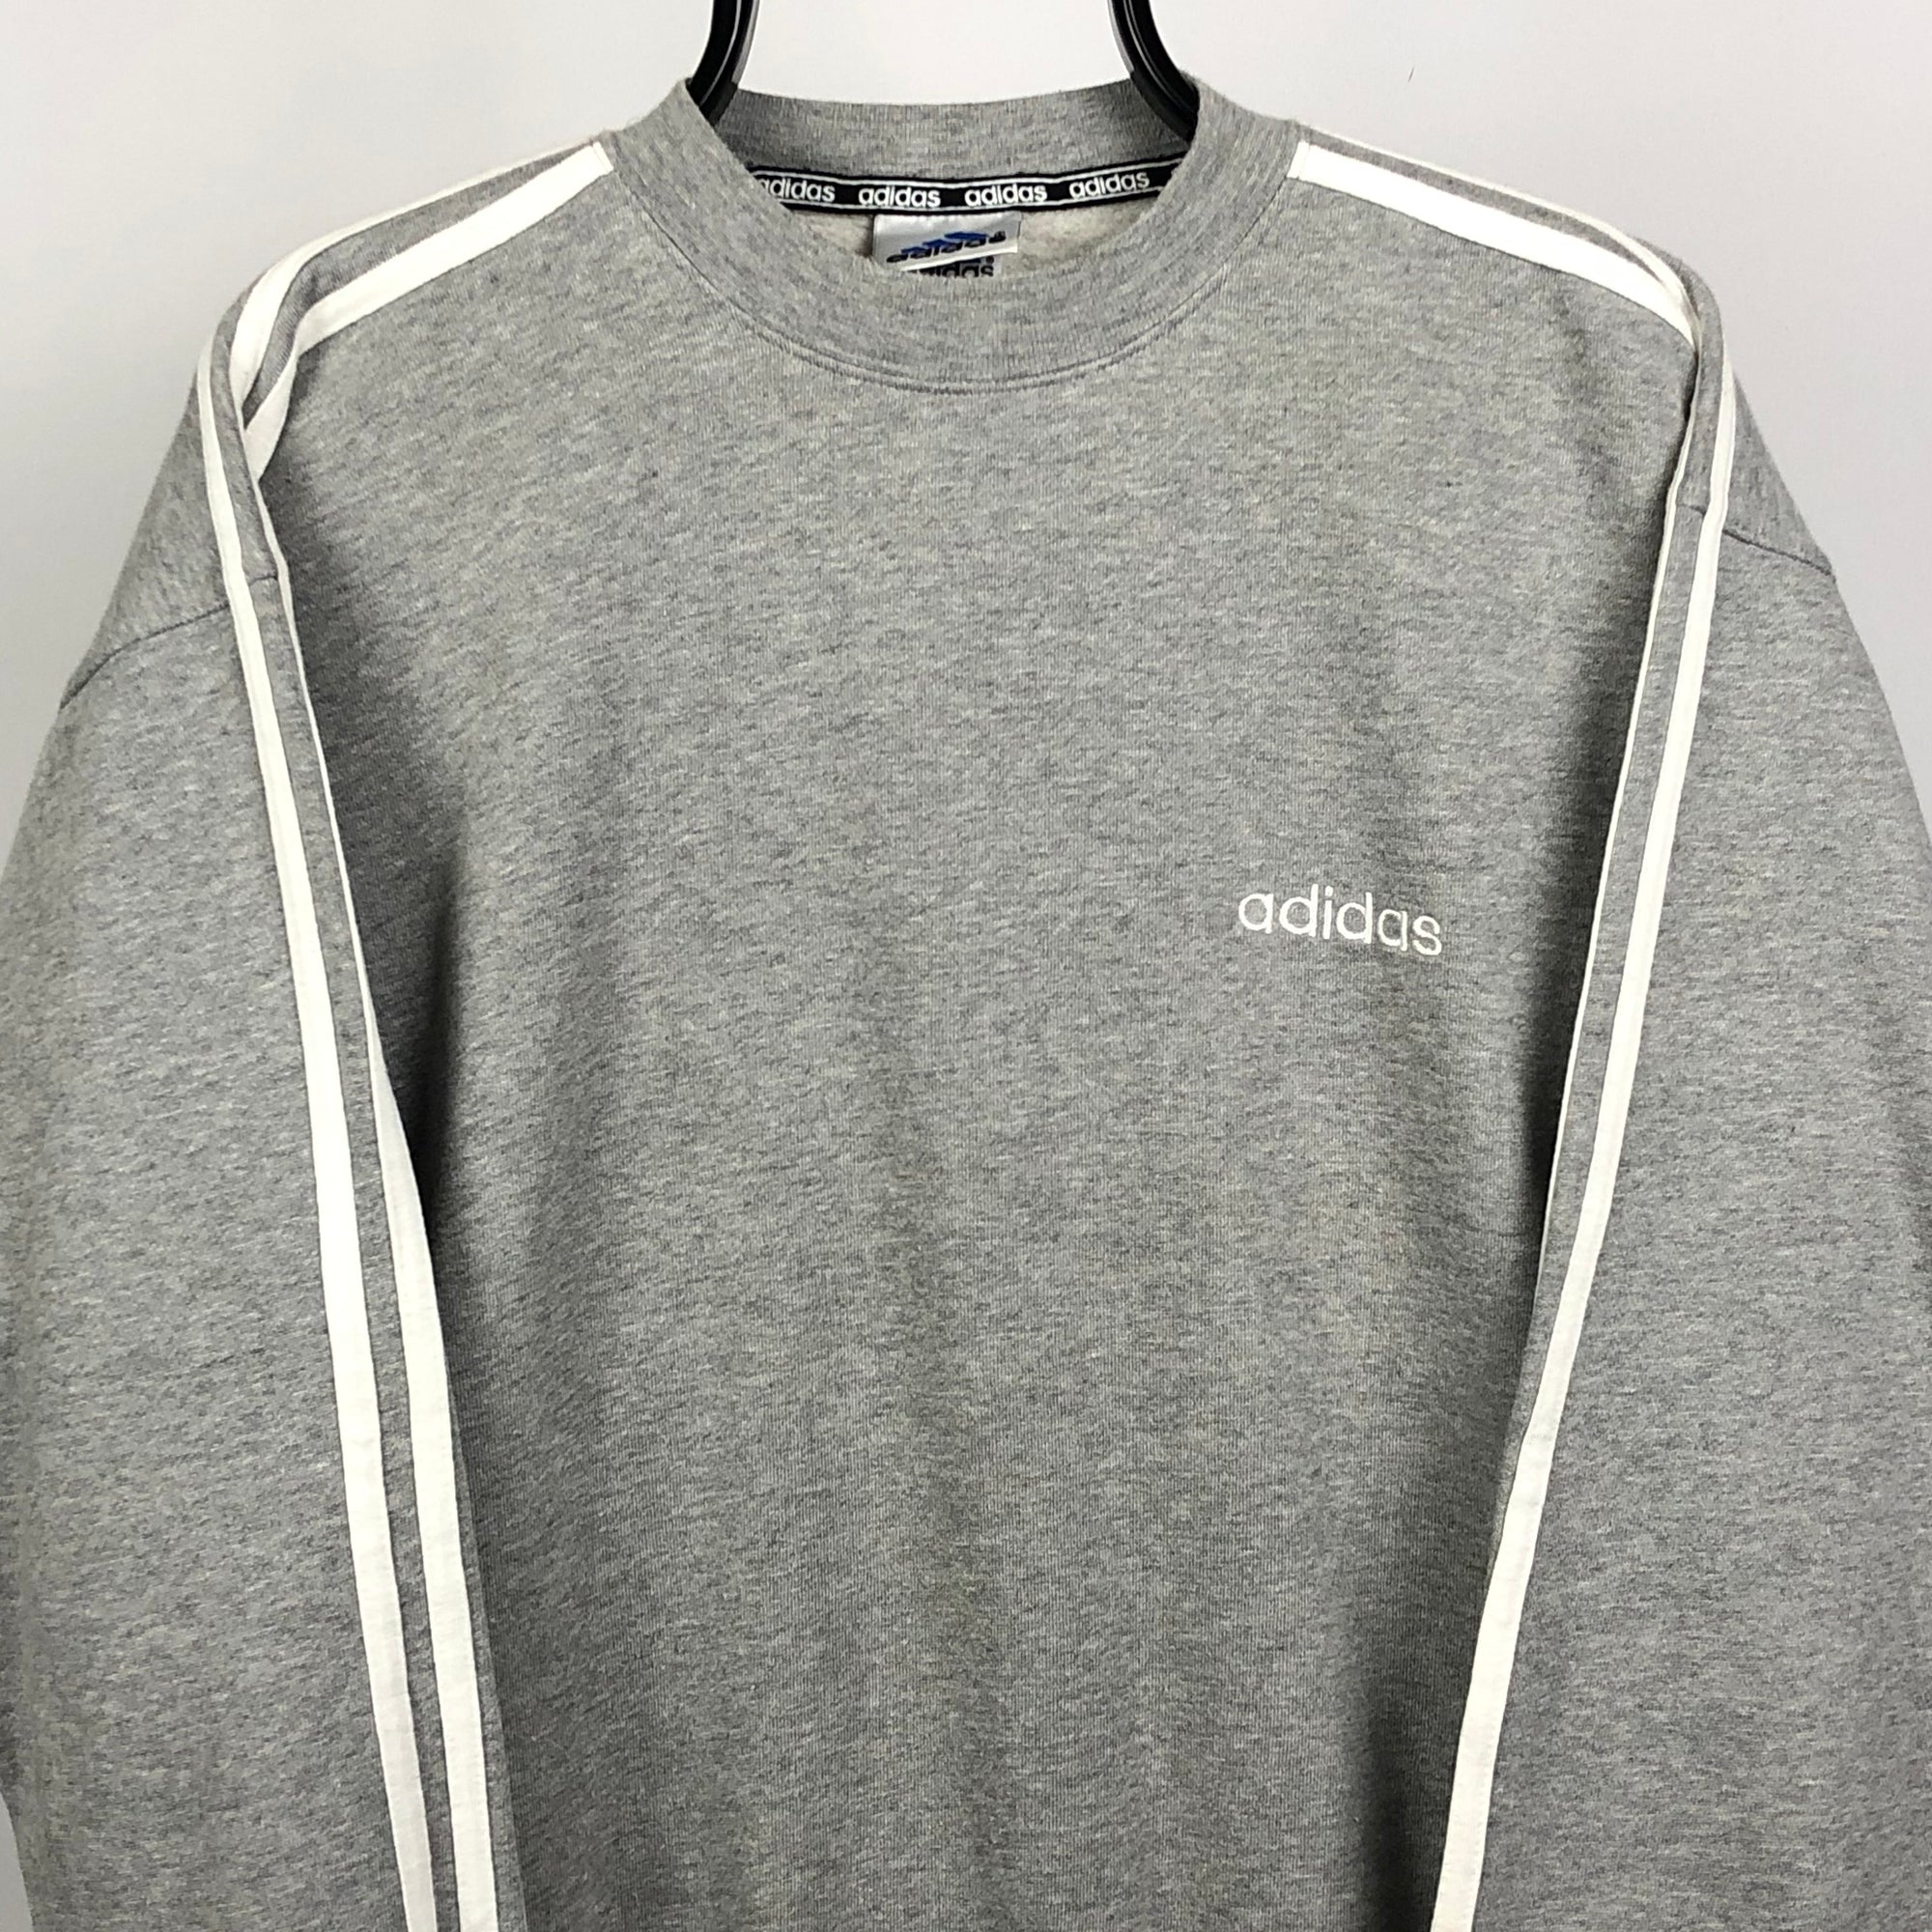 Vintage Adidas Embroidered Small Spellout Sweatshirt in Grey - Men's Medium/Women's Large